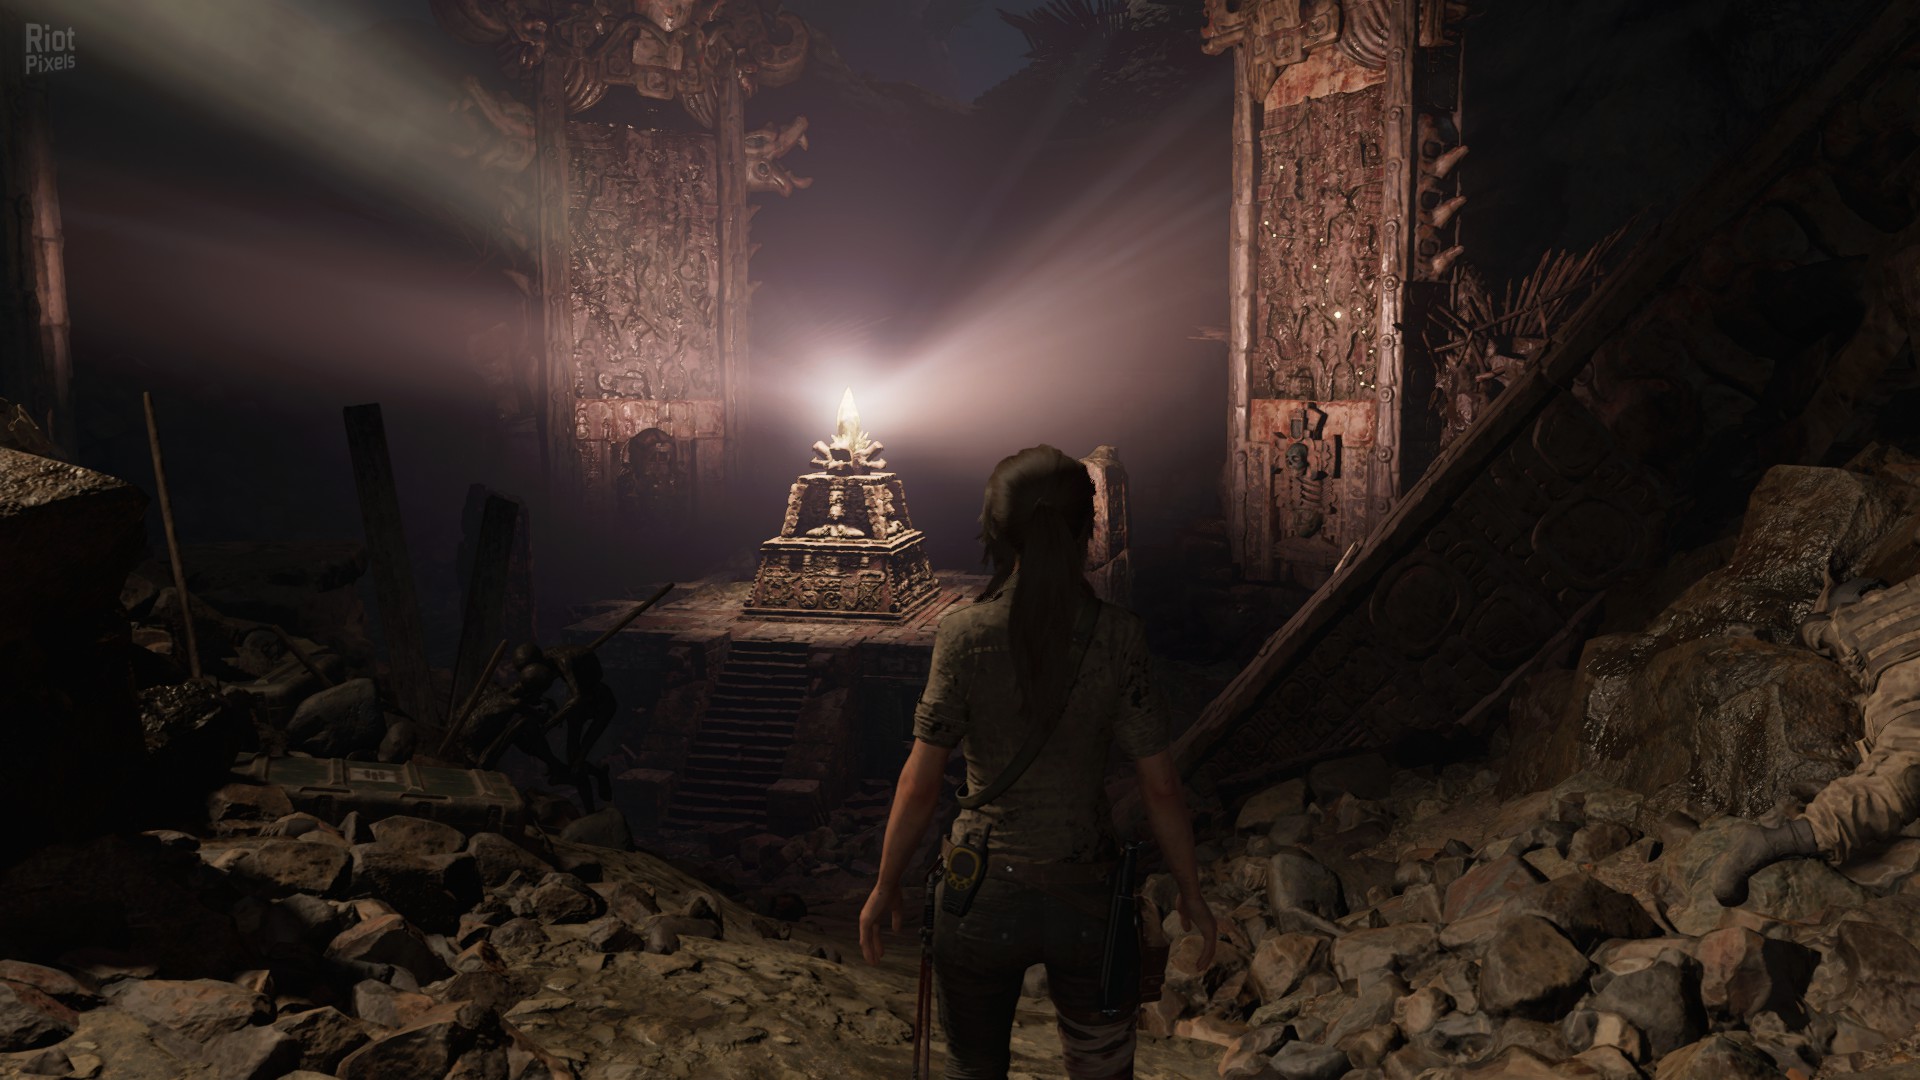 shadow of the tomb raider download for android